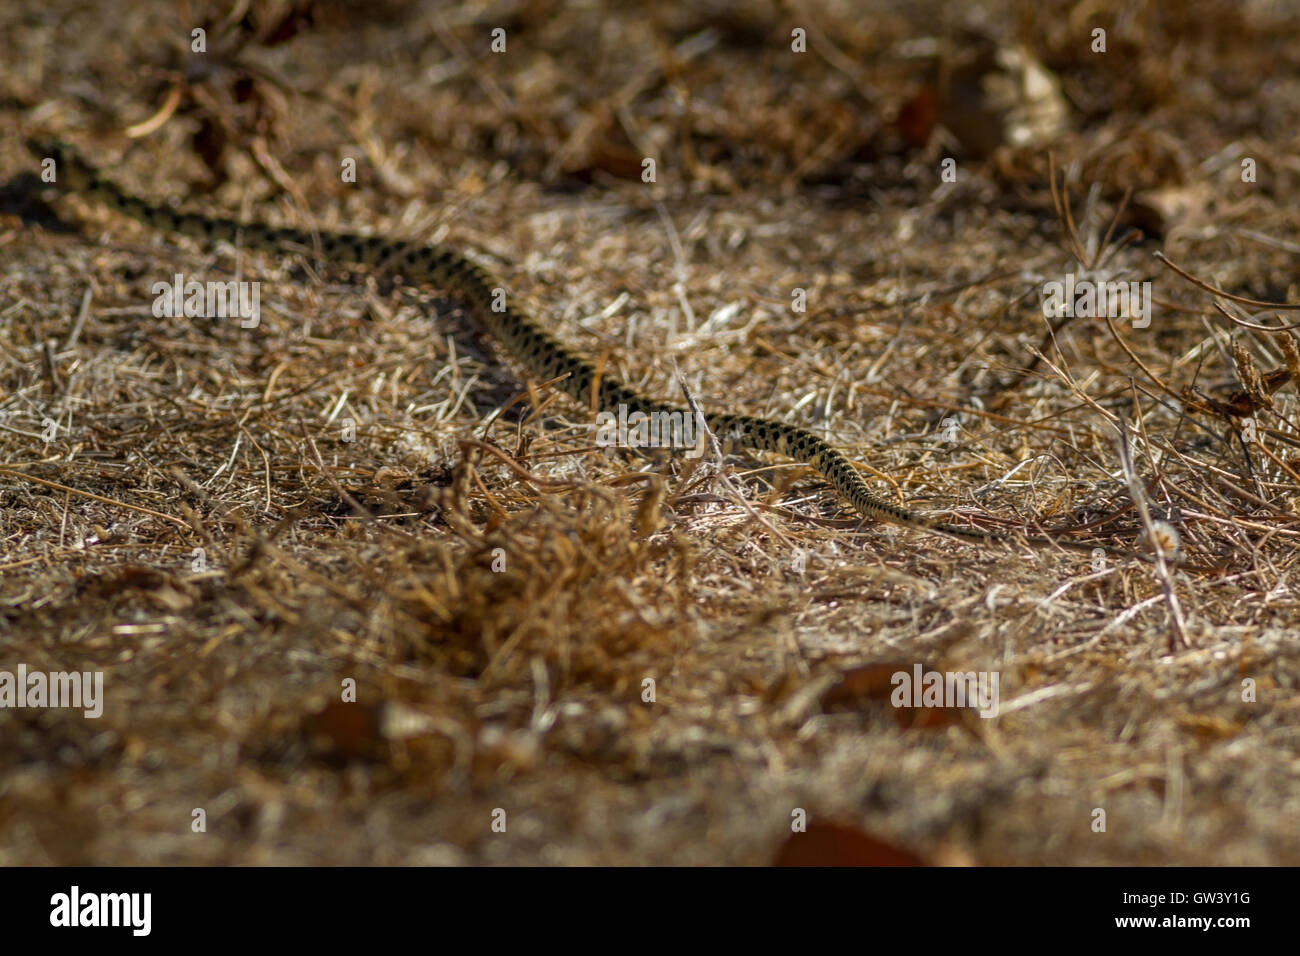 Horseshoe whip snake in the Ria Formosa Natural Park, Olhao, Algarve, Portugal Stock Photo